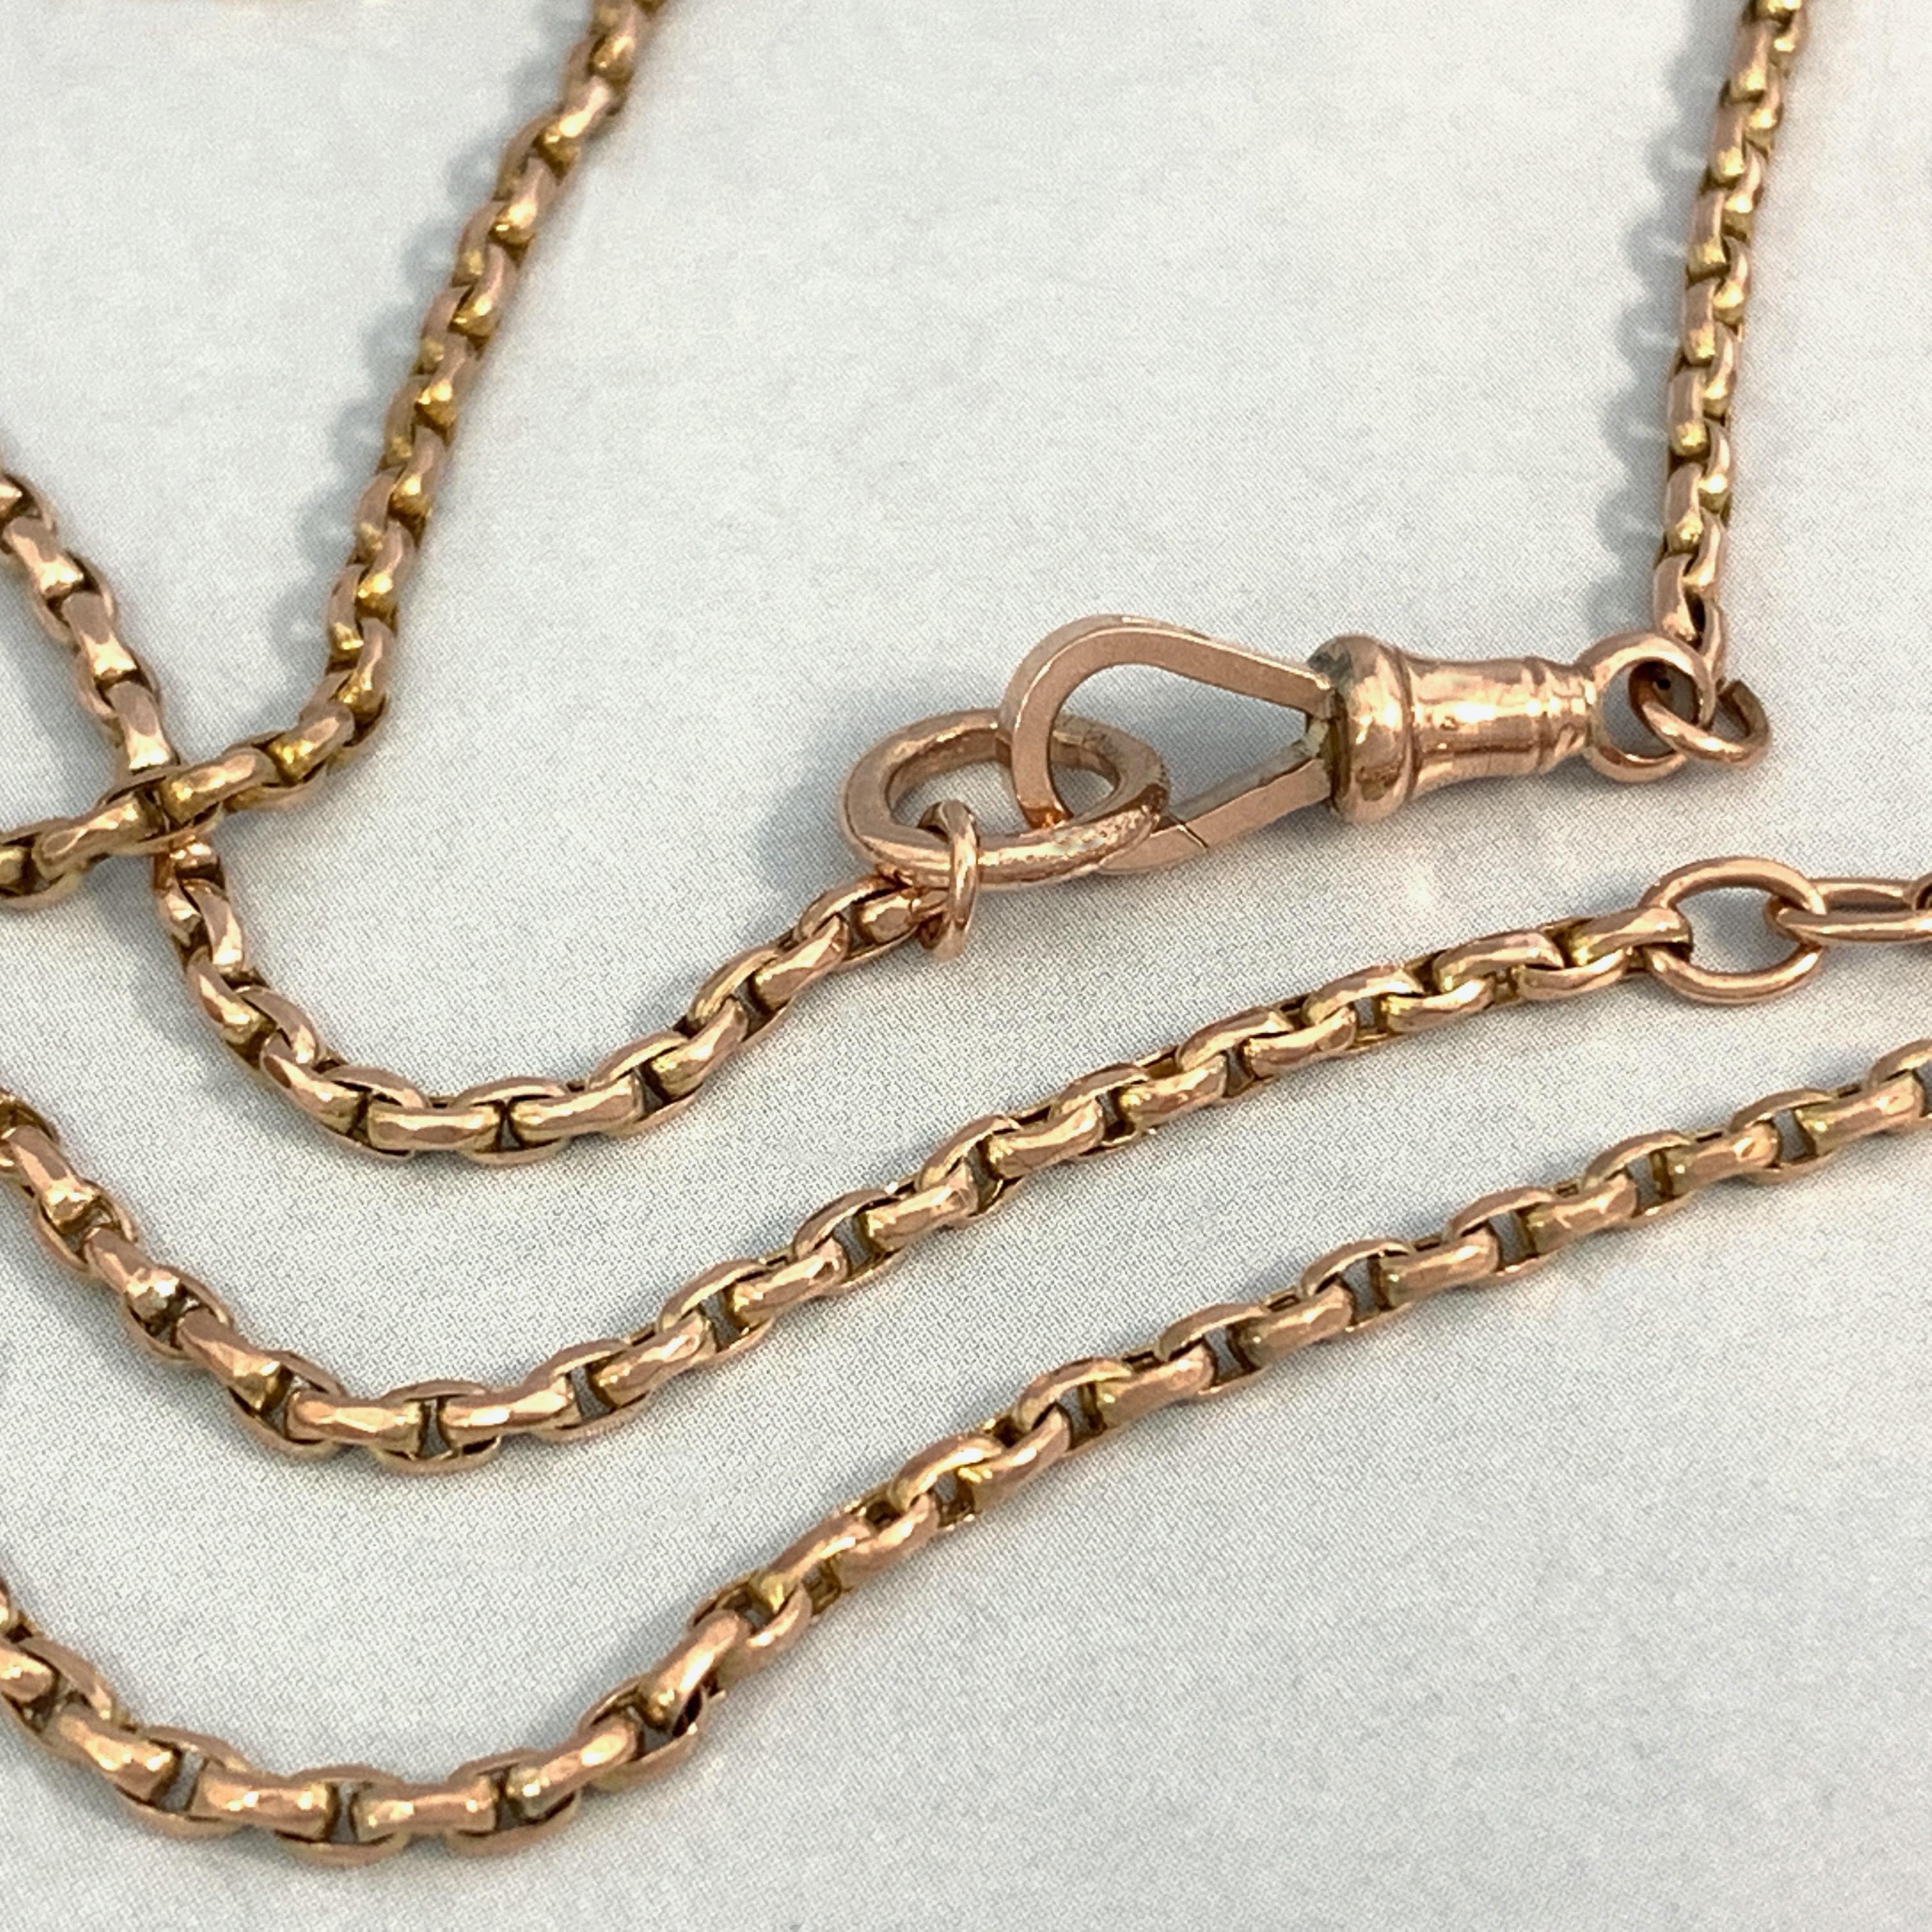 This sleek, versatile chain probably dates from before 1900 and would have been used for a lady's lorgnette, muff or watch.

It features tightly spaced oval belcher links in a with an adjuster ring 9